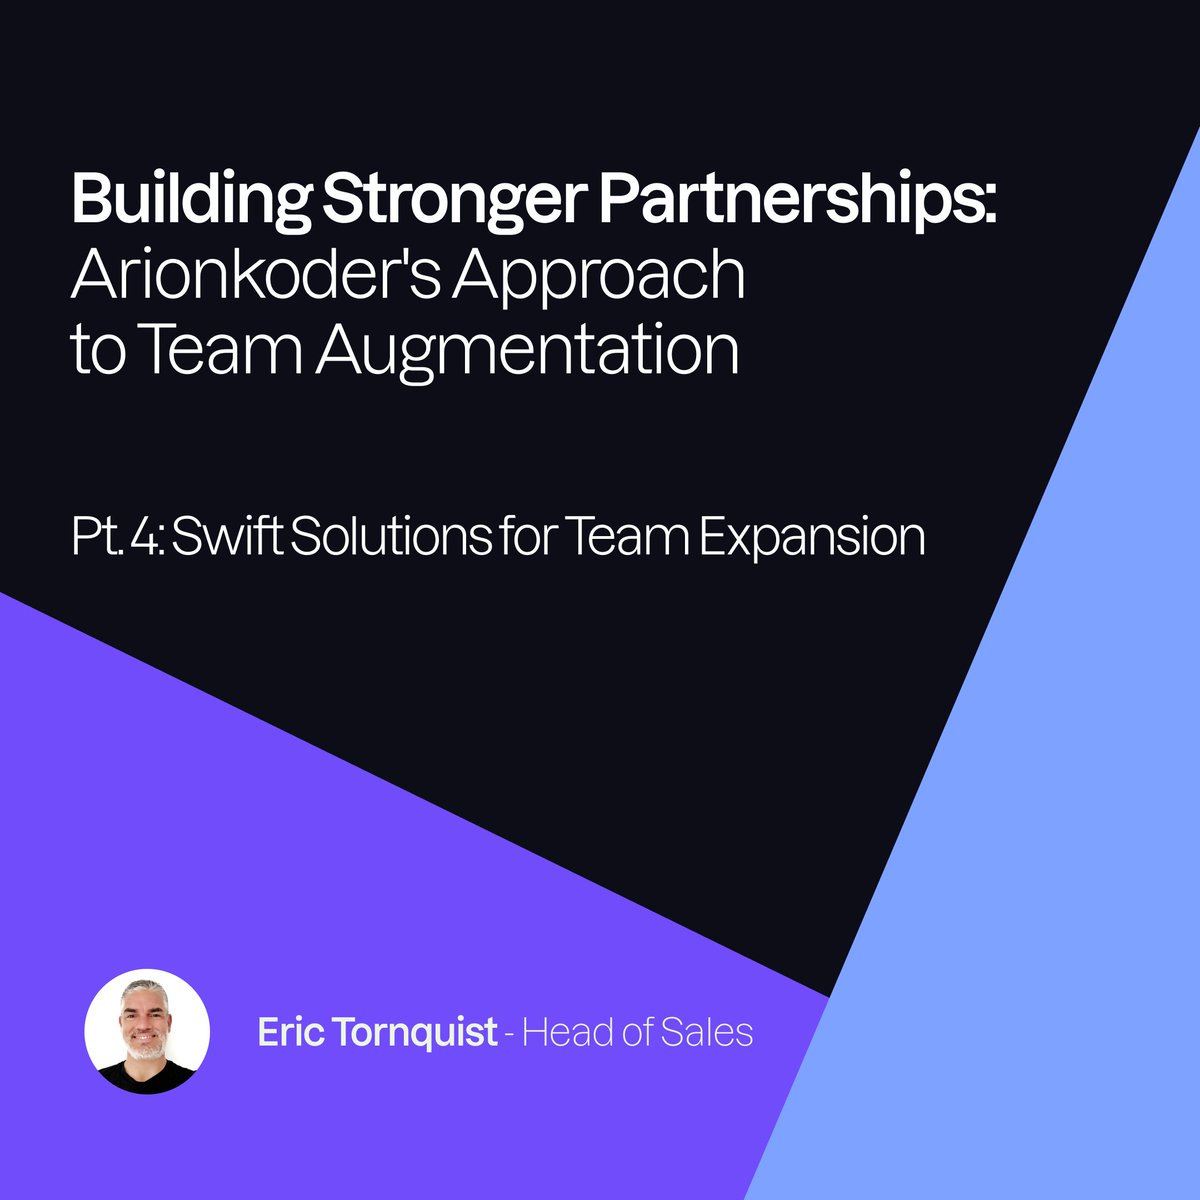 #TeamAugmentation means stronger teams, and we ensure you find the perfect talent match for your needs.

Discover how this strategy can transform your company as told by @tornquist, Head of Sales and Marketing, at bit.ly/teamaug4

#staffaugmentation #businessgoals